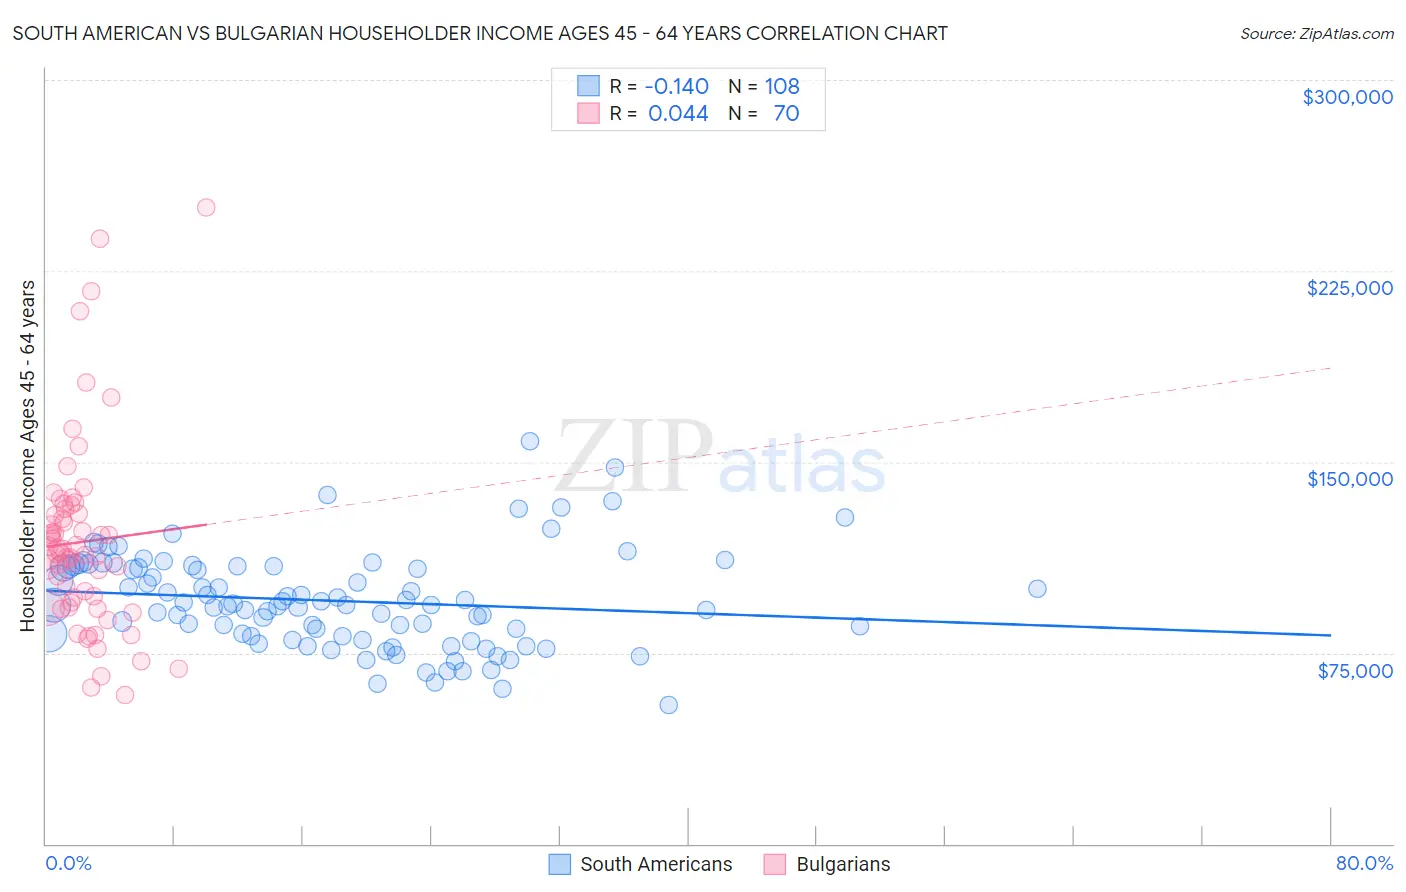 South American vs Bulgarian Householder Income Ages 45 - 64 years